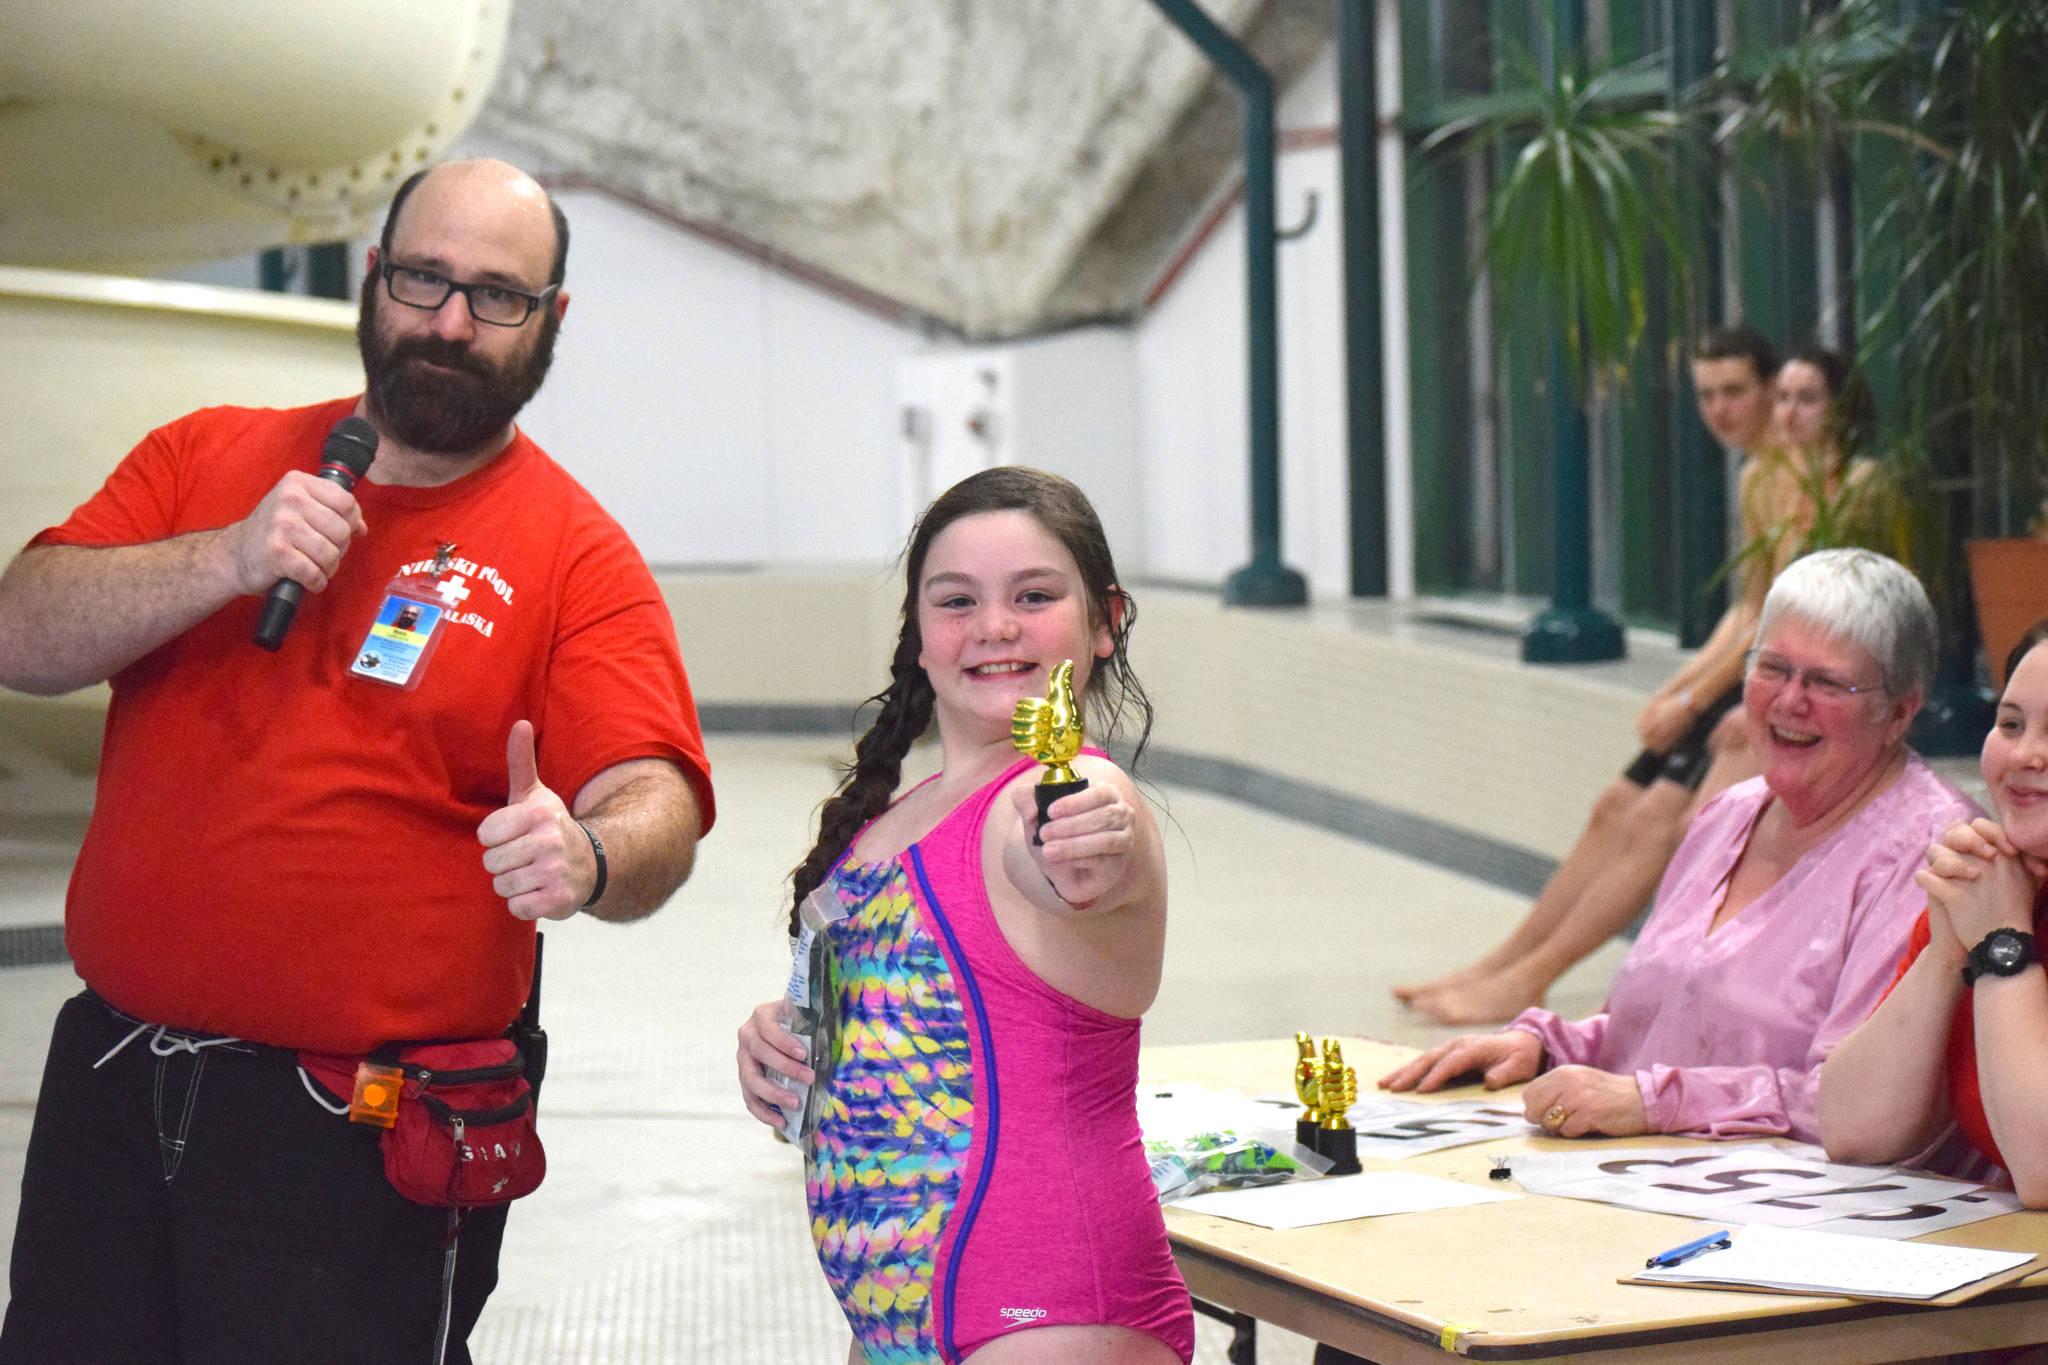 One of the winners of the cannonball contest at the Nikiski Pool poses with her trophy on Thursday, Jan. 17, 2019. (Photo by Brian Mazurek/Peninsula Clarion)